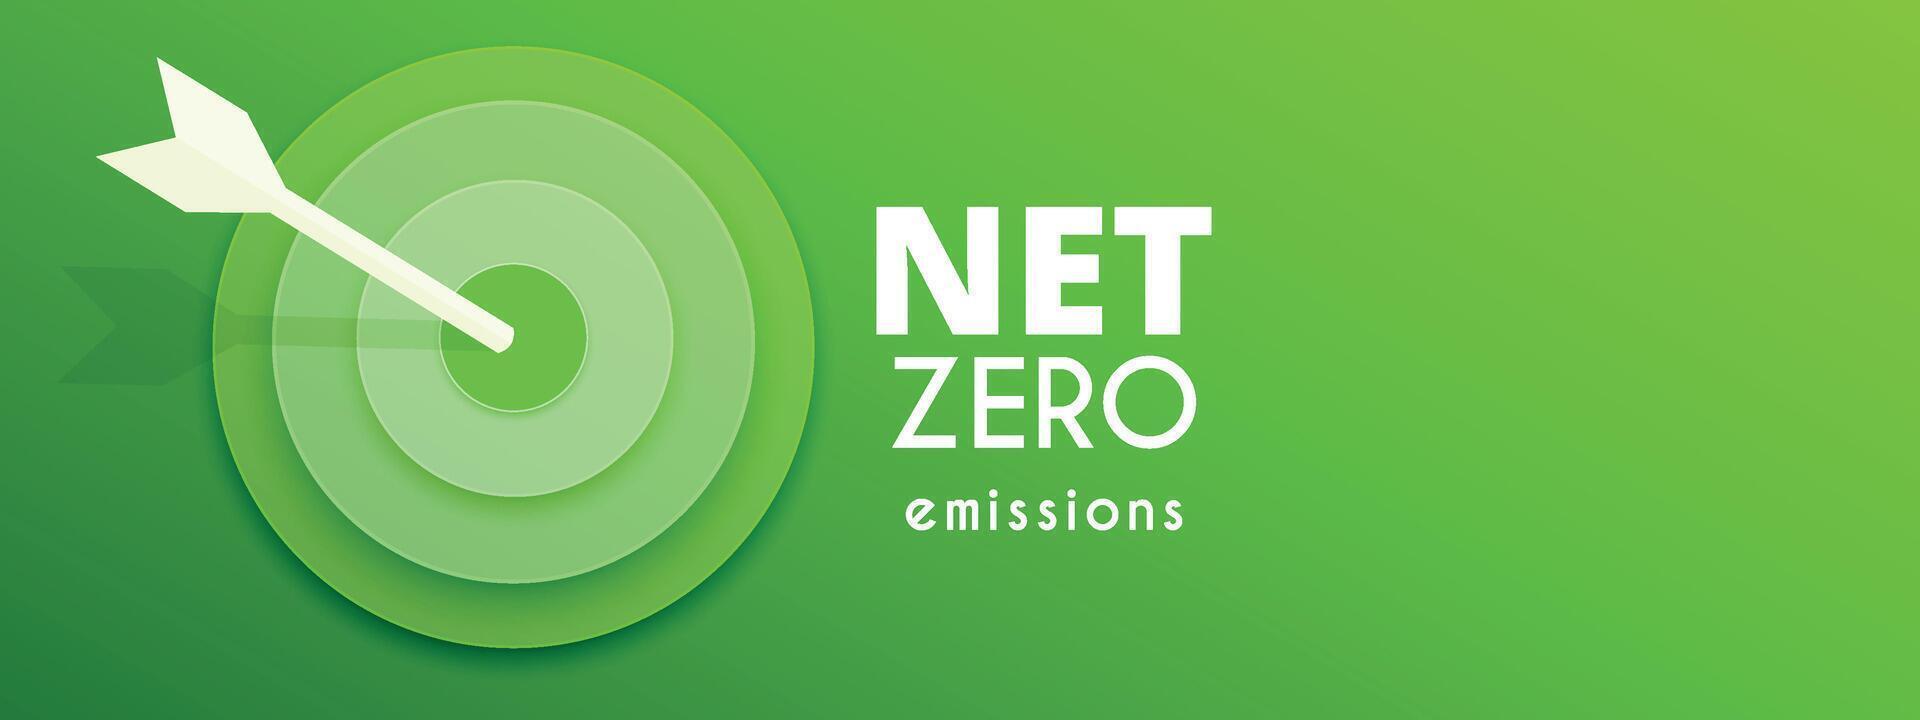 Carbon neutral concept. Net zero greenhouse gas emissions target. Vector illustration on green background. Paper cut . Banner template for a website.